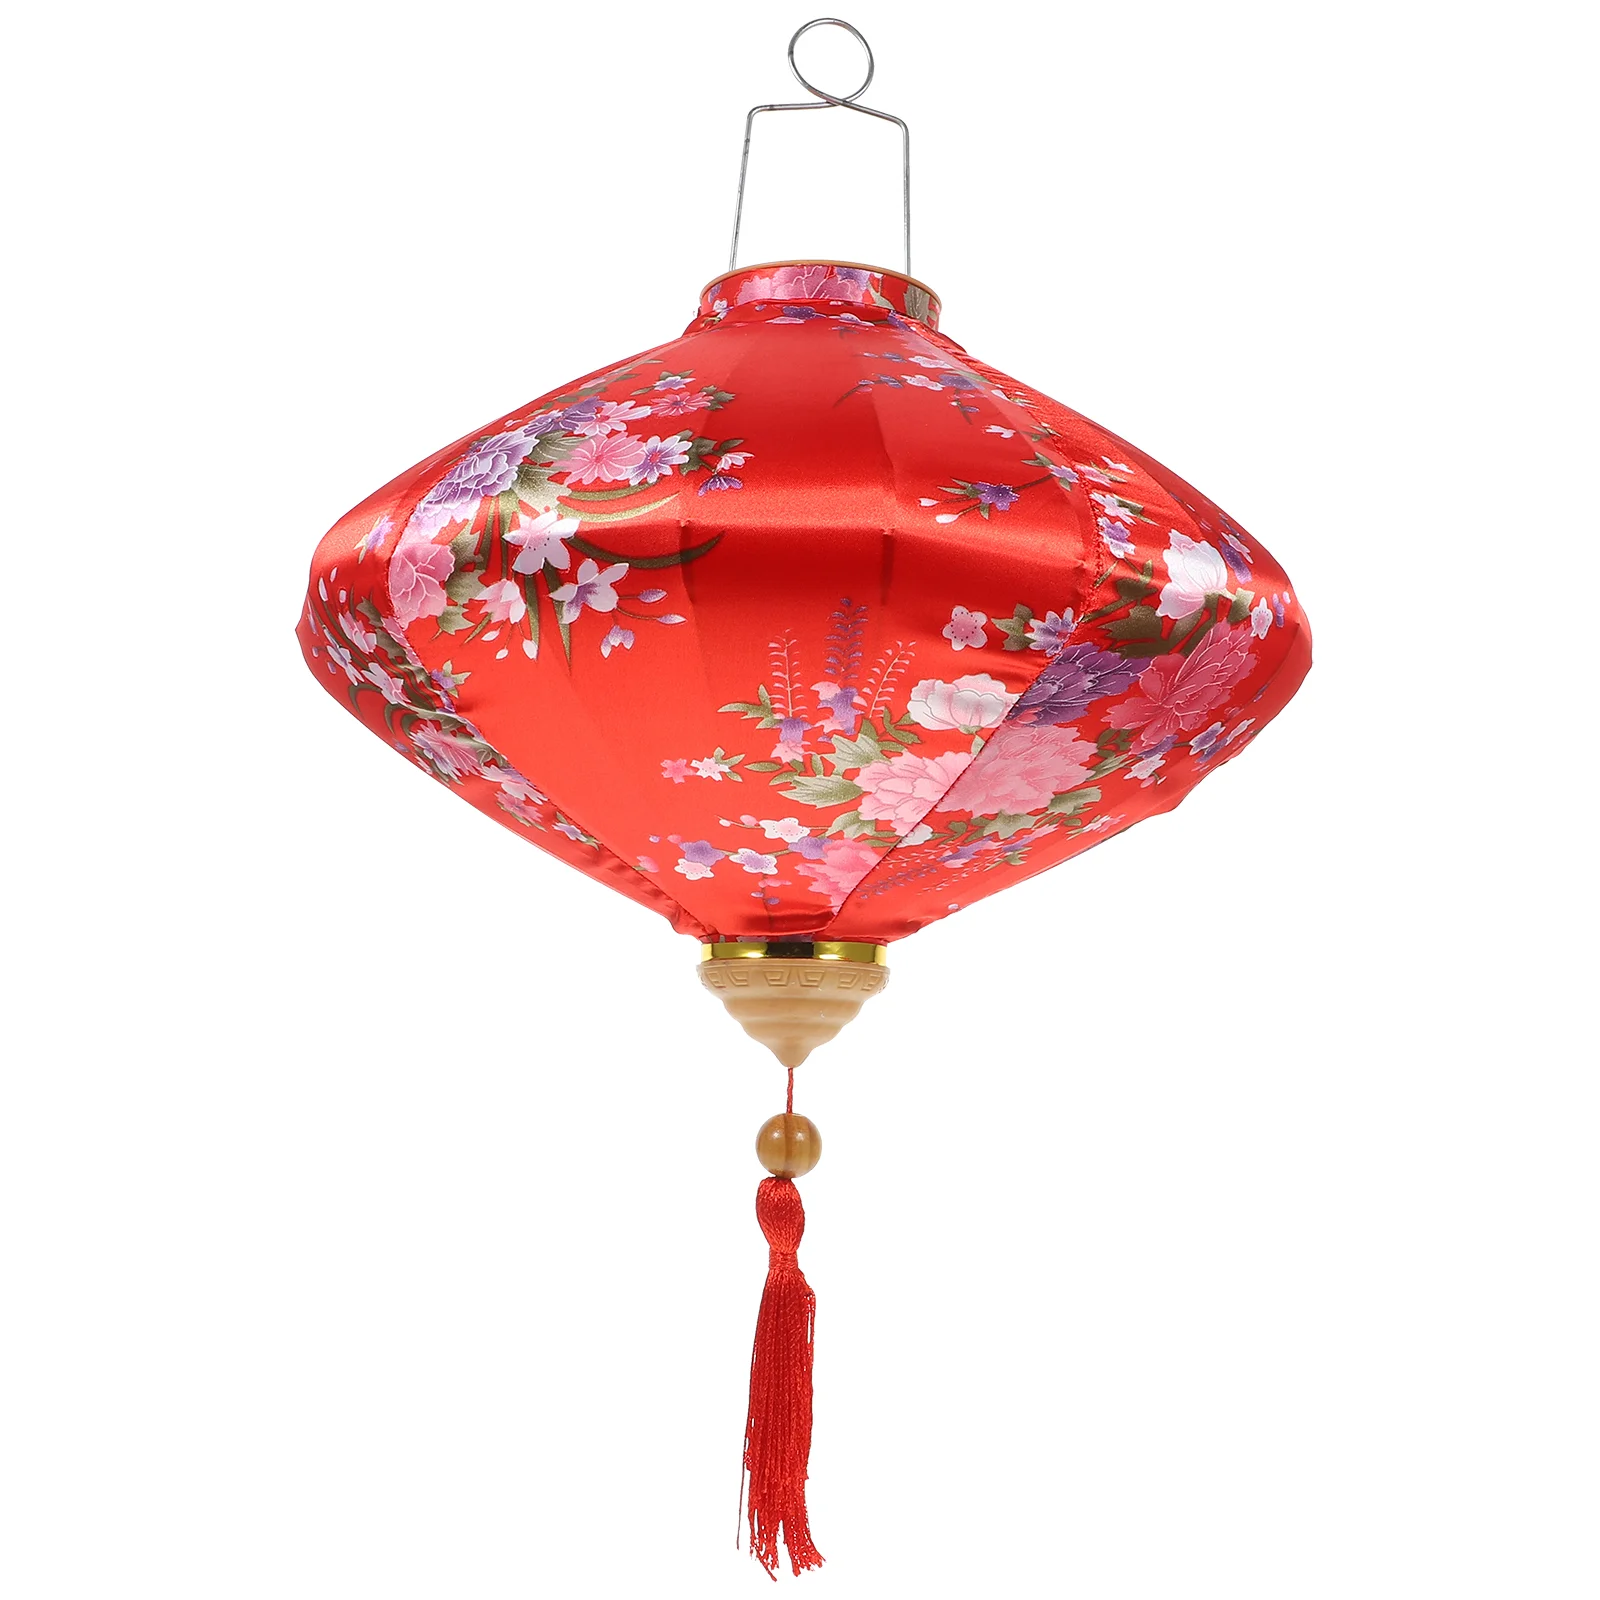 Vietnamese Silk Lantern Red Chinese Lantern Japanese Flowers Lanterns Oriental Style Traditional Decoration New Year Wedding coloful flowers boutonniere for wedding man pins silk rose corsages bracelet for boutonnieres marriage lapela noivo e padrinhos